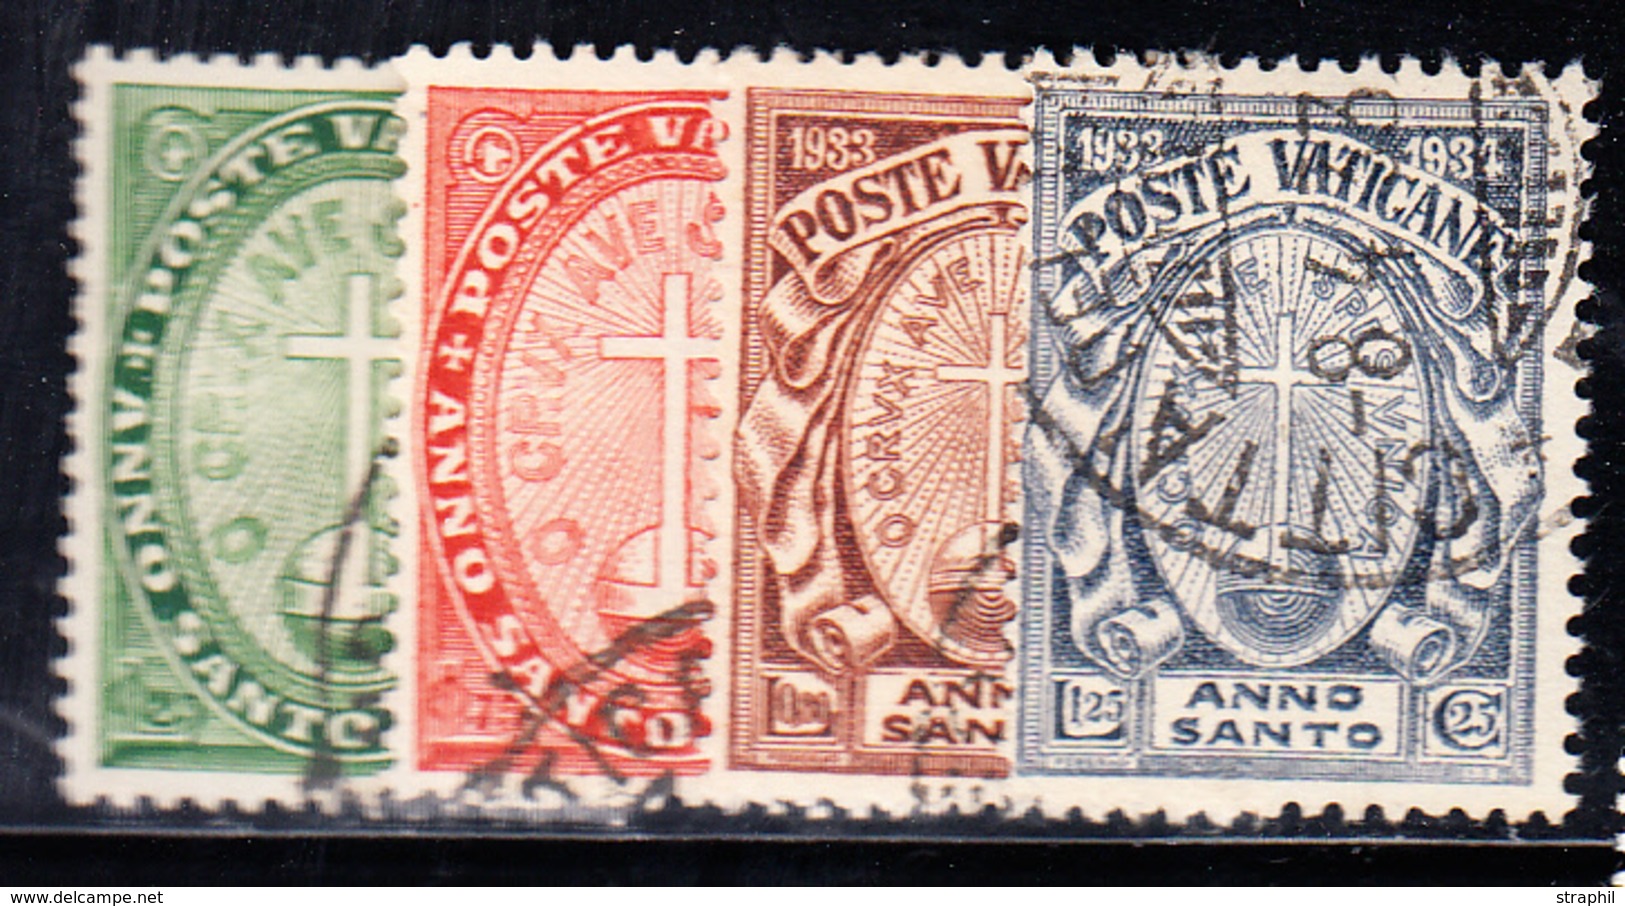 O VATICAN - O - N°40/43 - 4 Val - TB - Unused Stamps